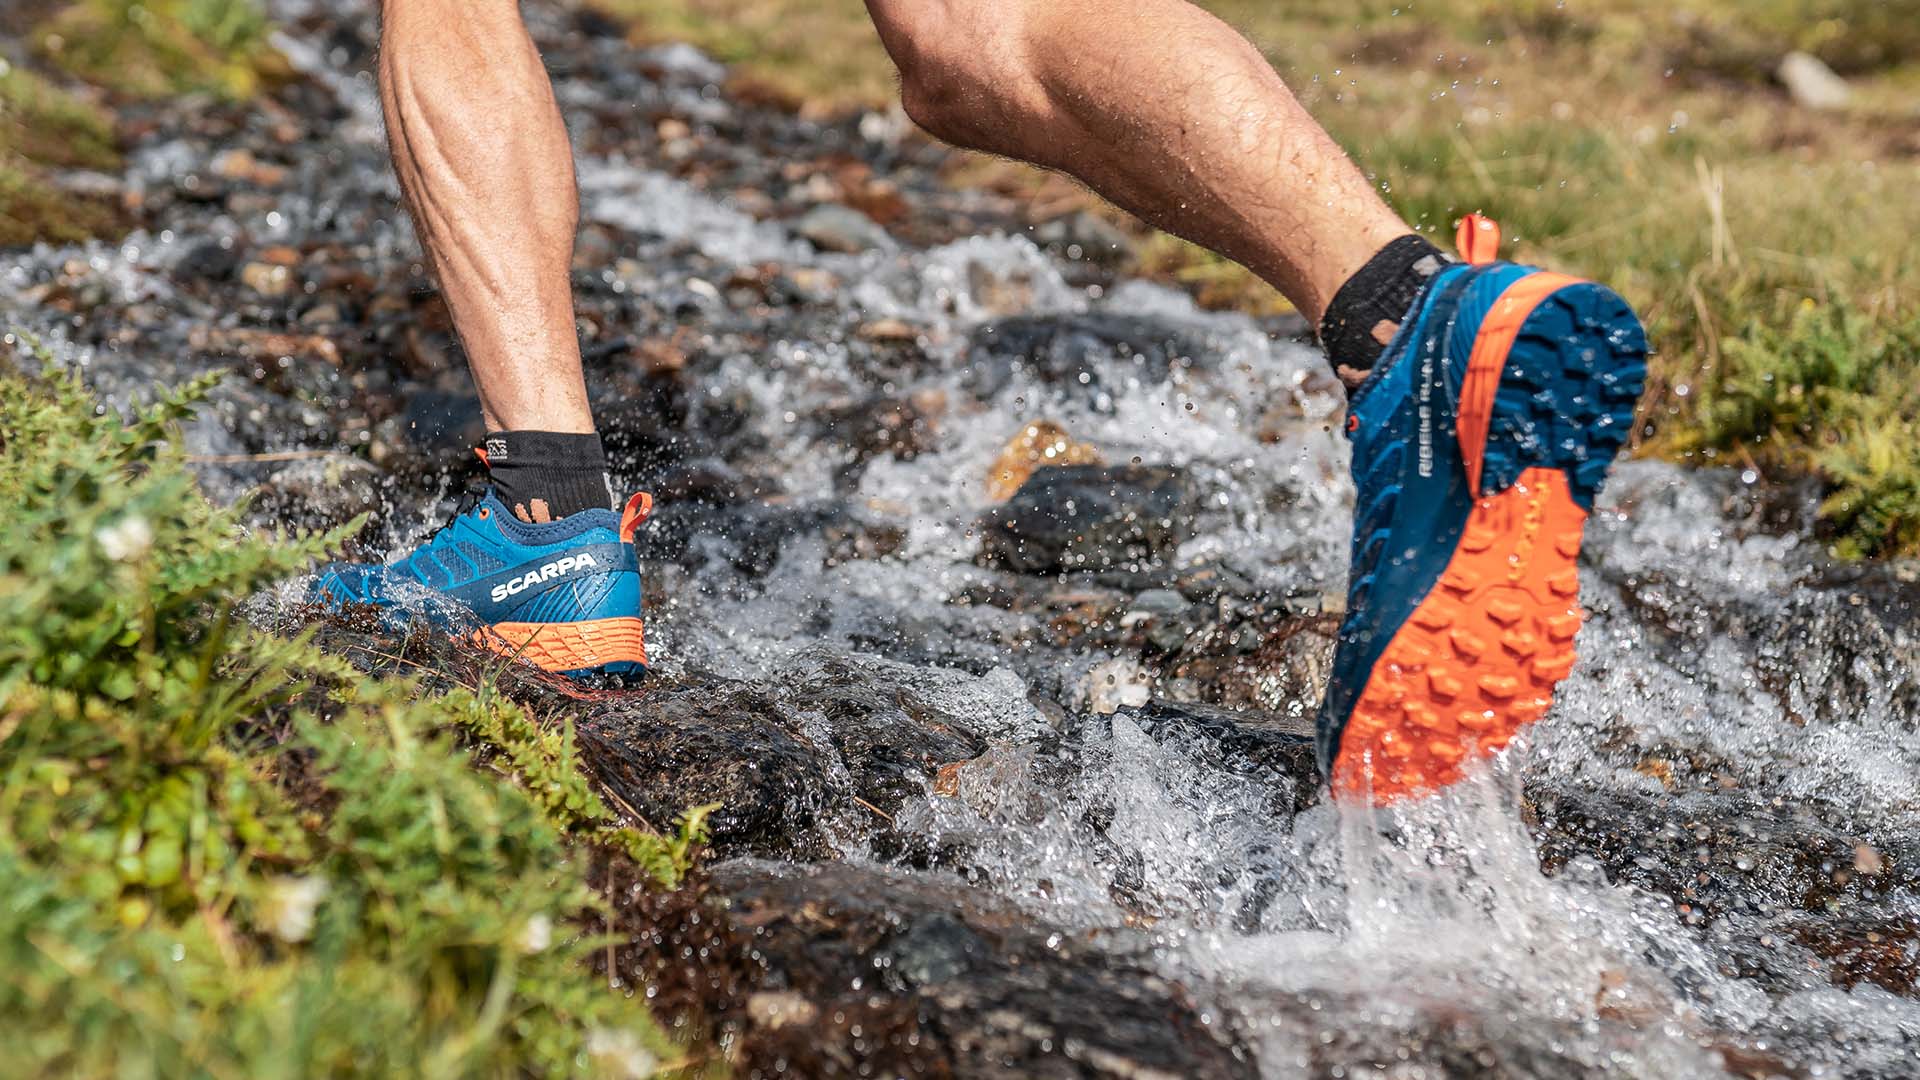 SCARPA RIBELLE RUN GTX - Test and Review - Ultra Runner Mag